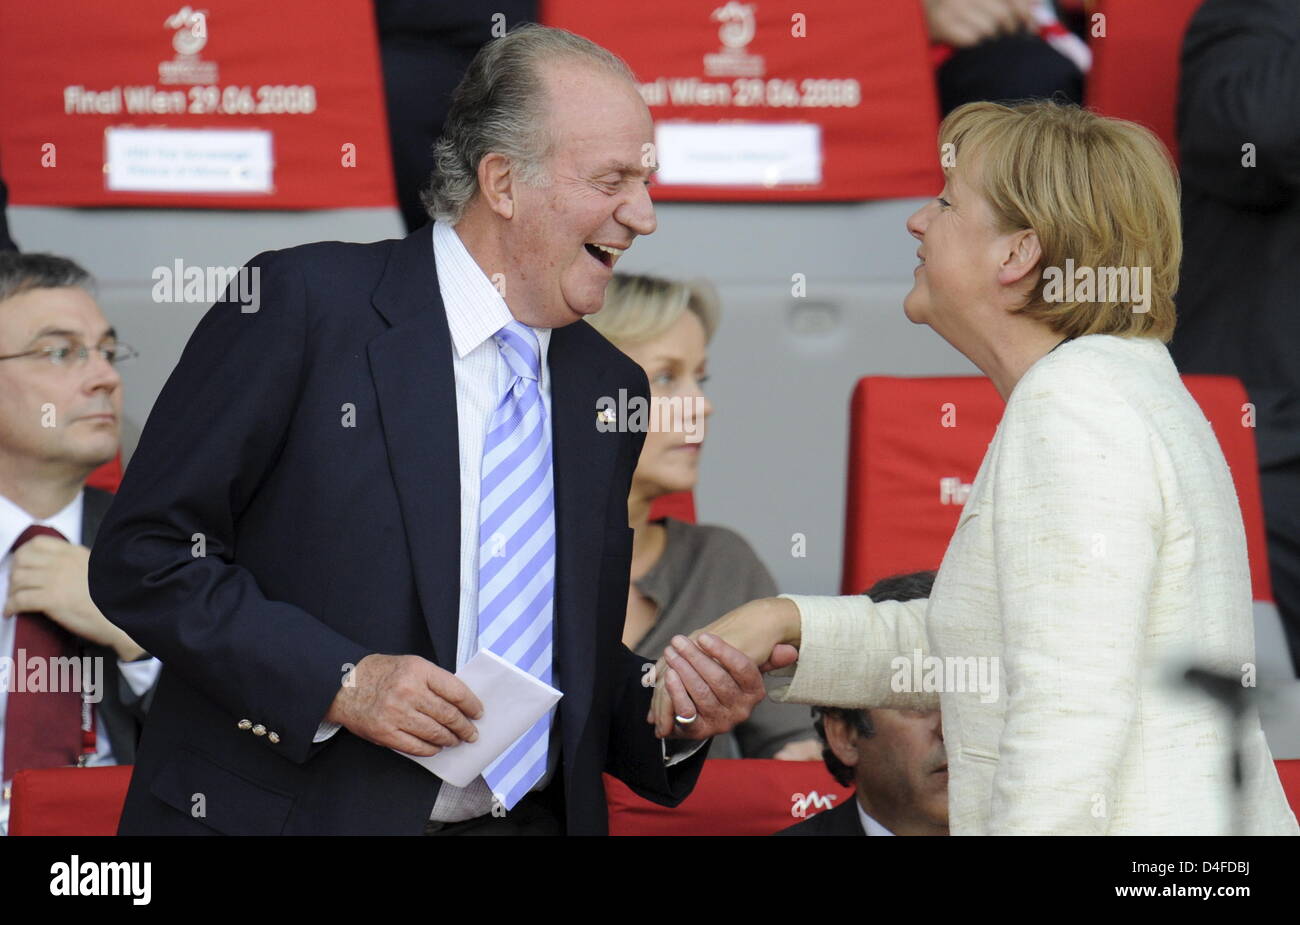 Spanish King Juan Carlos (l) welcomes German Chancellor Angela Merkel during the UEFA EURO 2008 final match between Germany and Spain at the Ernst Happel stadium in Vienna, Austria, 29 June 2008. Photo: Peter Kneffel dpa +++###dpa###+++ Stock Photo